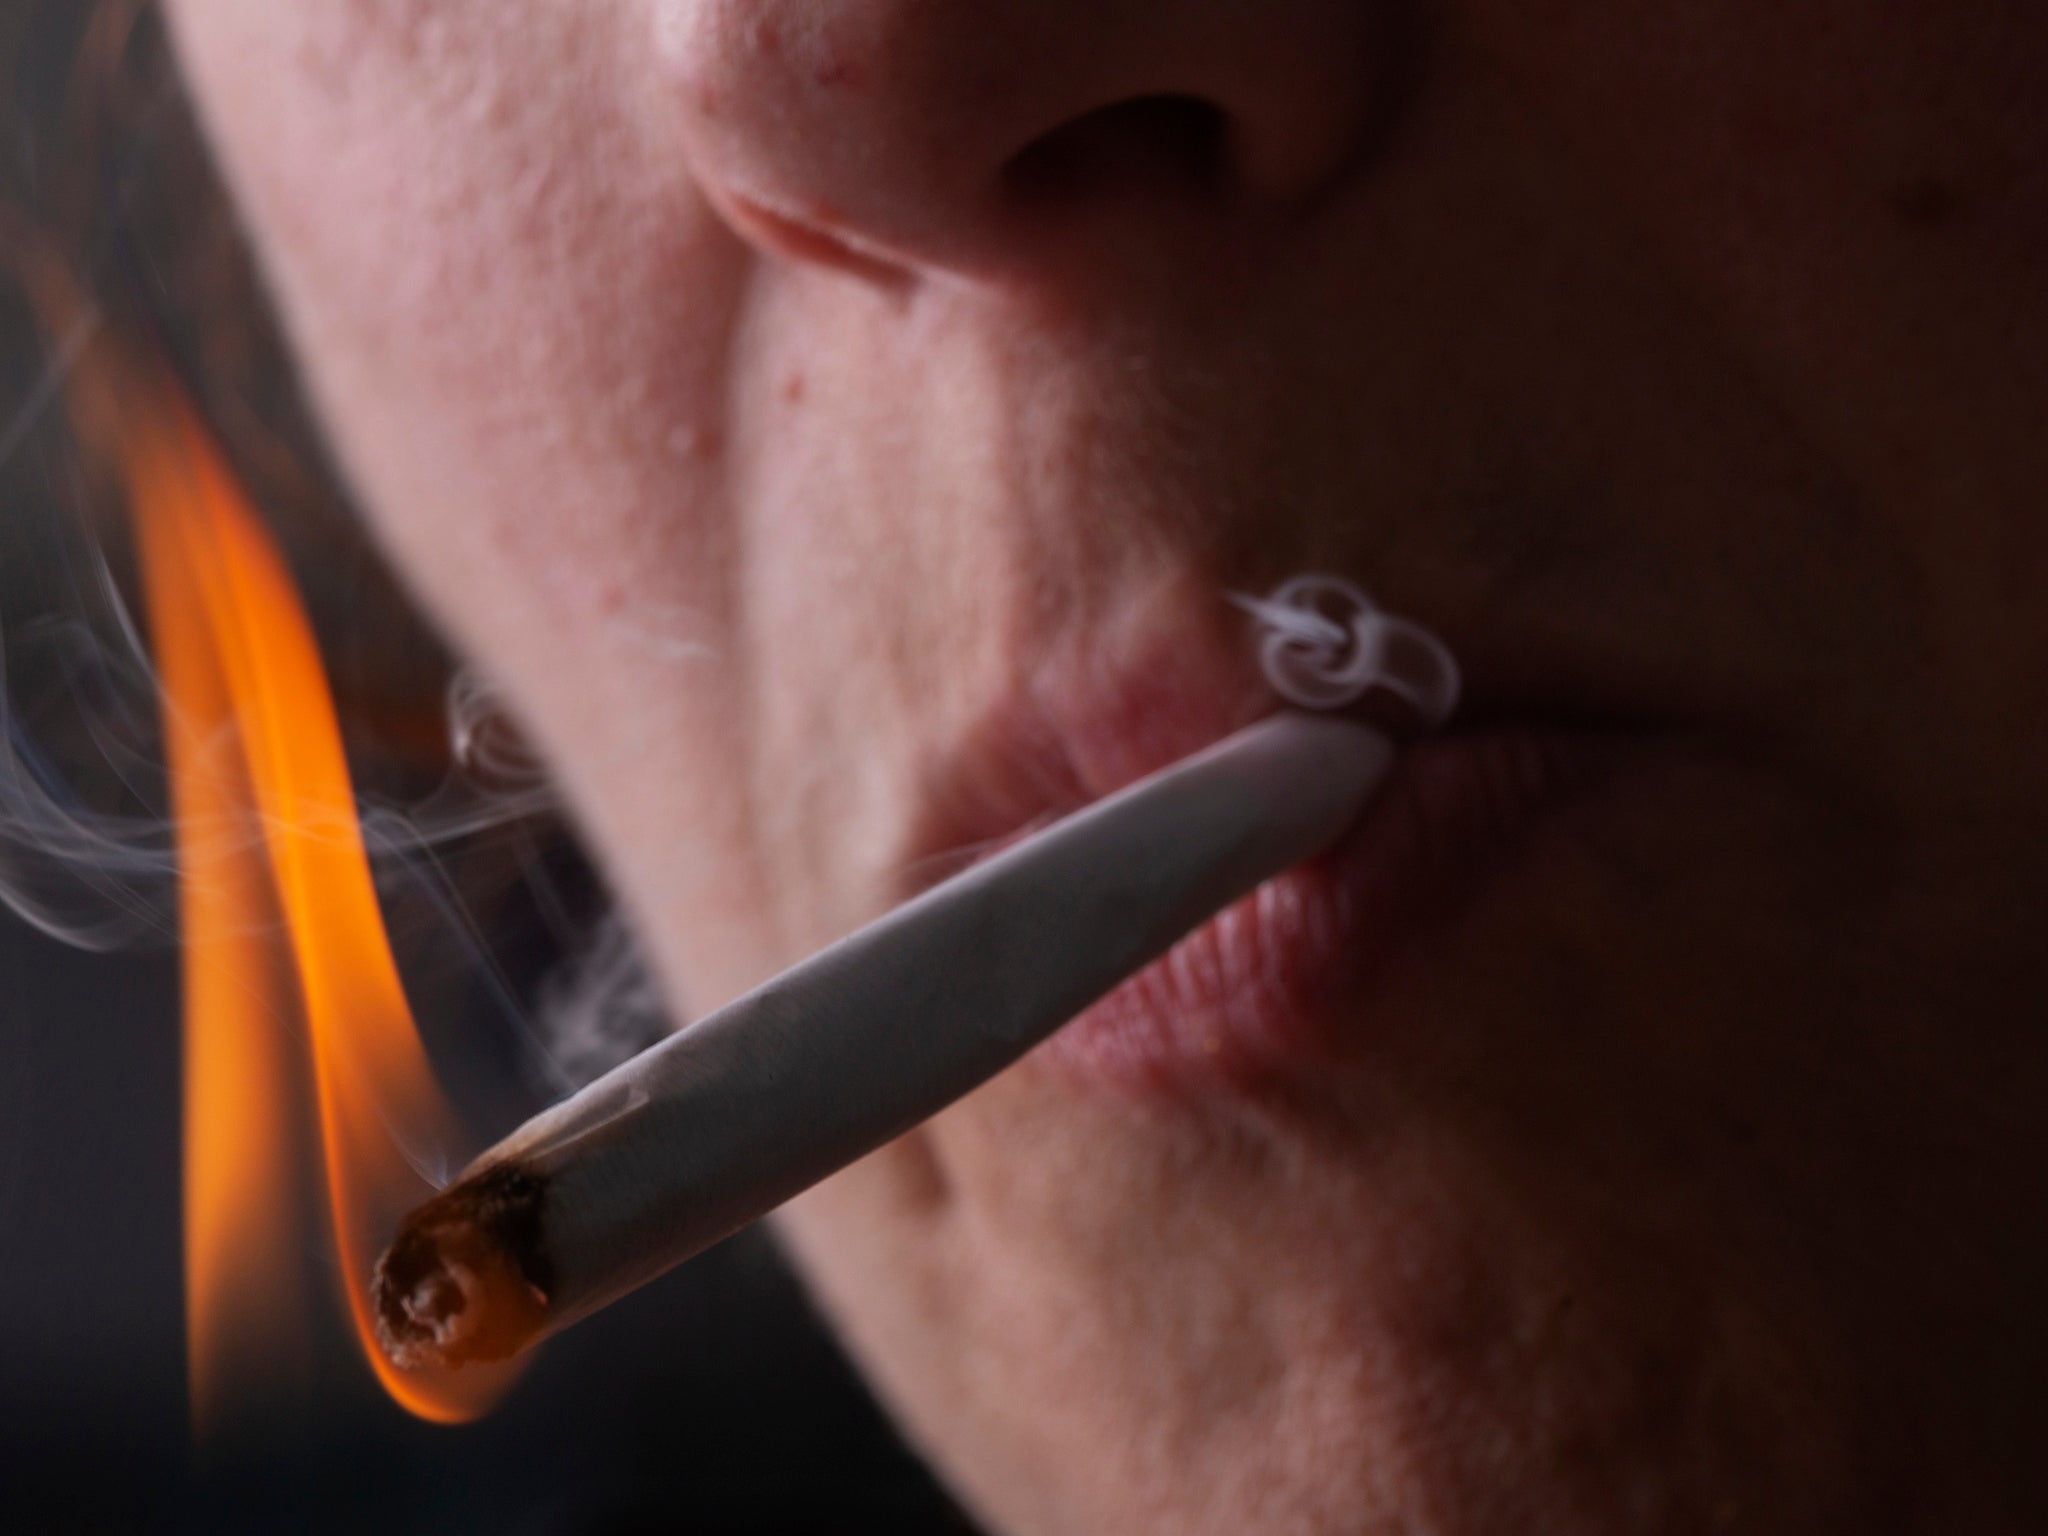 Compared with tobacco, marijuana smoking causes a fivefold greater impairment of the blood’s oxygen-carrying capacity